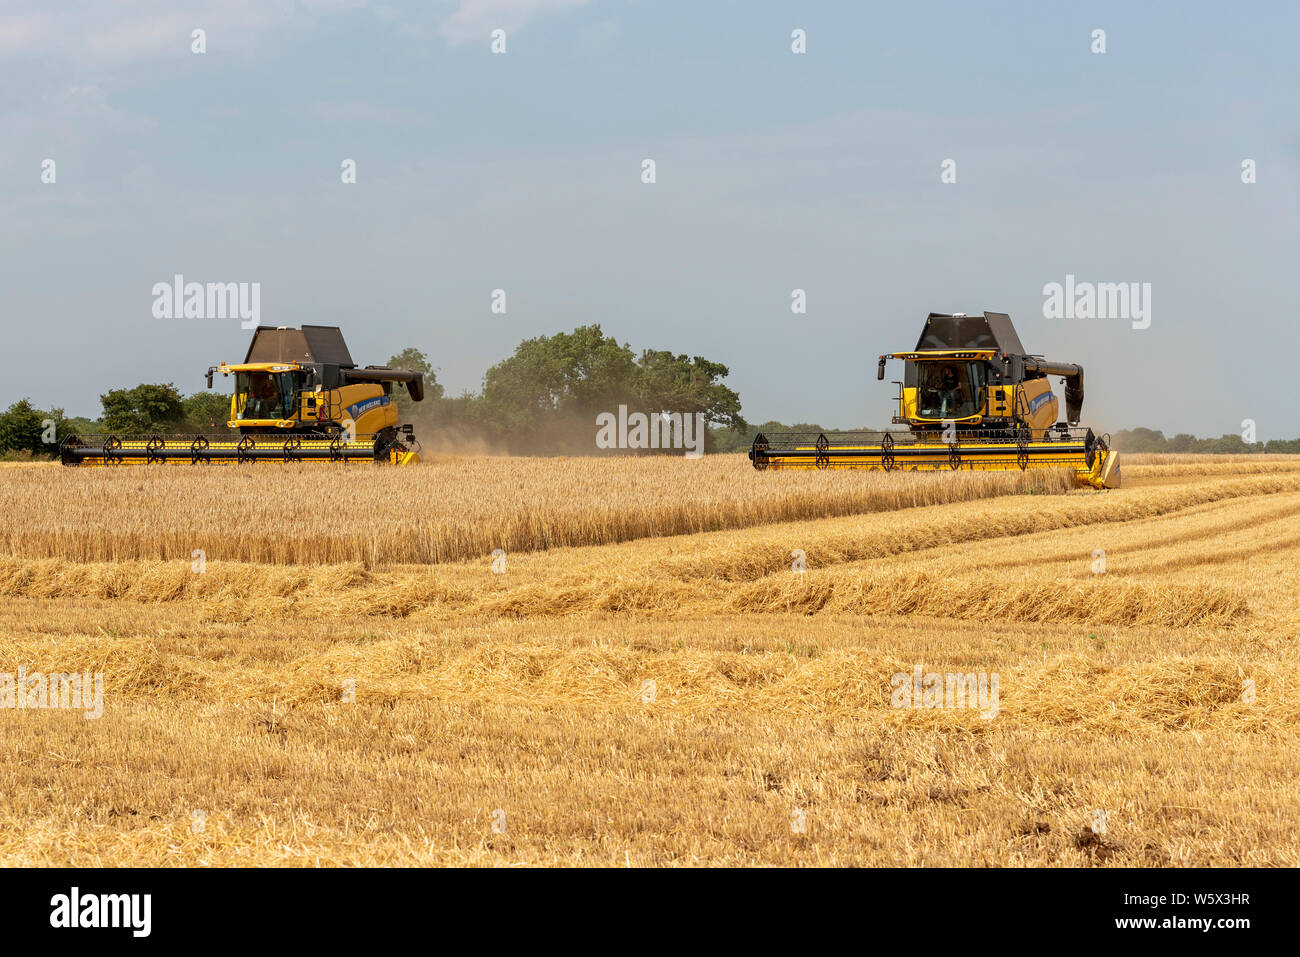 Cheltenham, Gloucestershire, England, UK. Two combine harvesters working to harvest a field of barley, which when dried be sent to a brewery Stock Photo